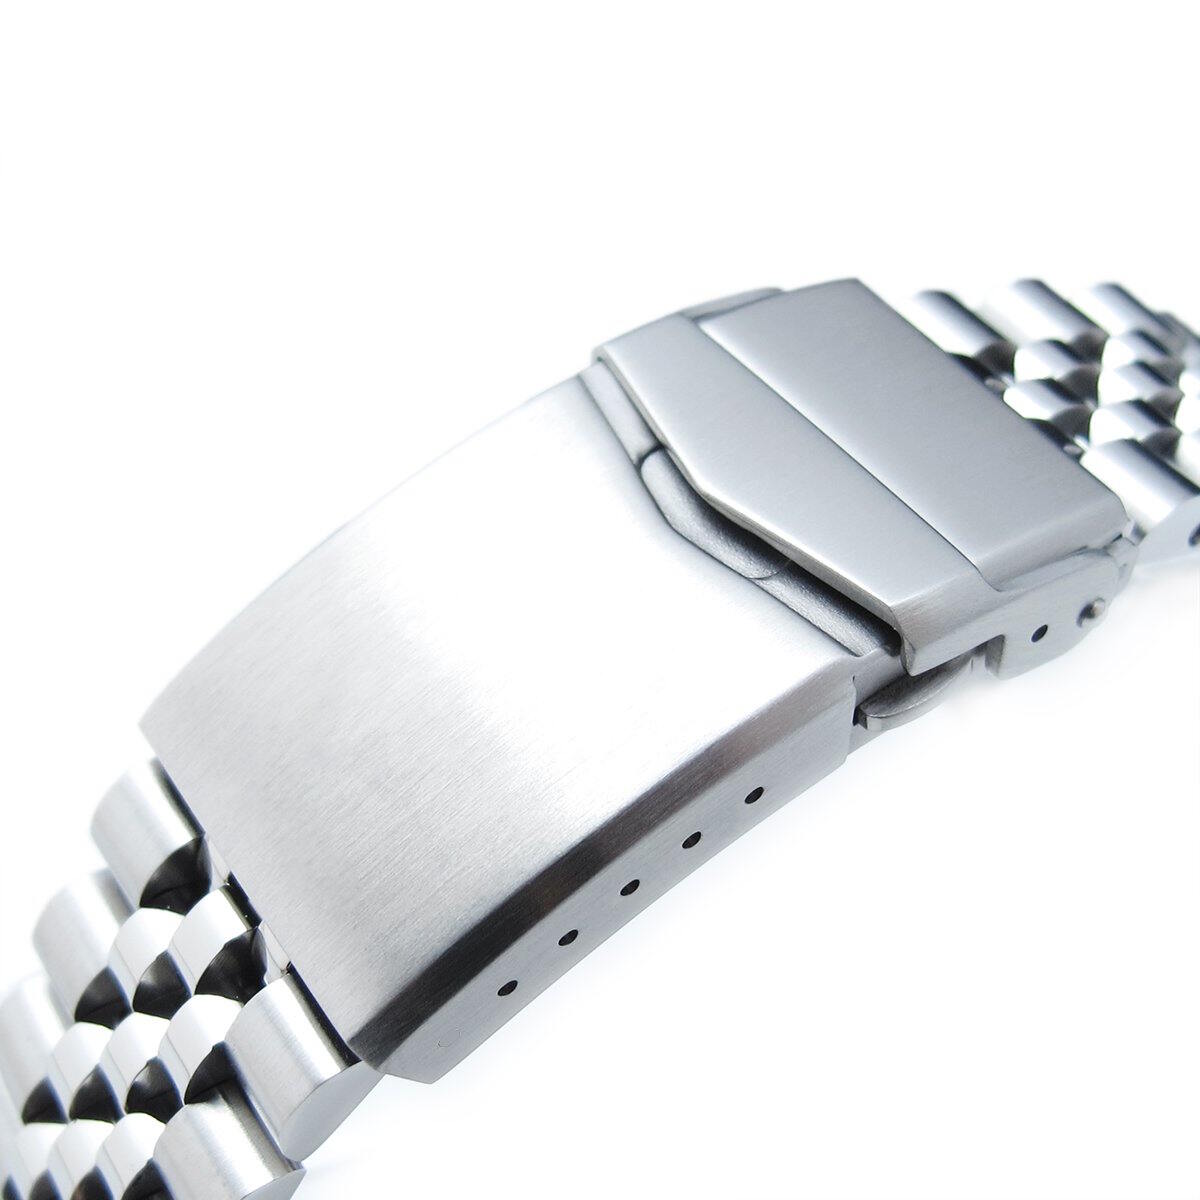 New Style 22mm 316l Stainless Steel Silver Jubilee Watch Band